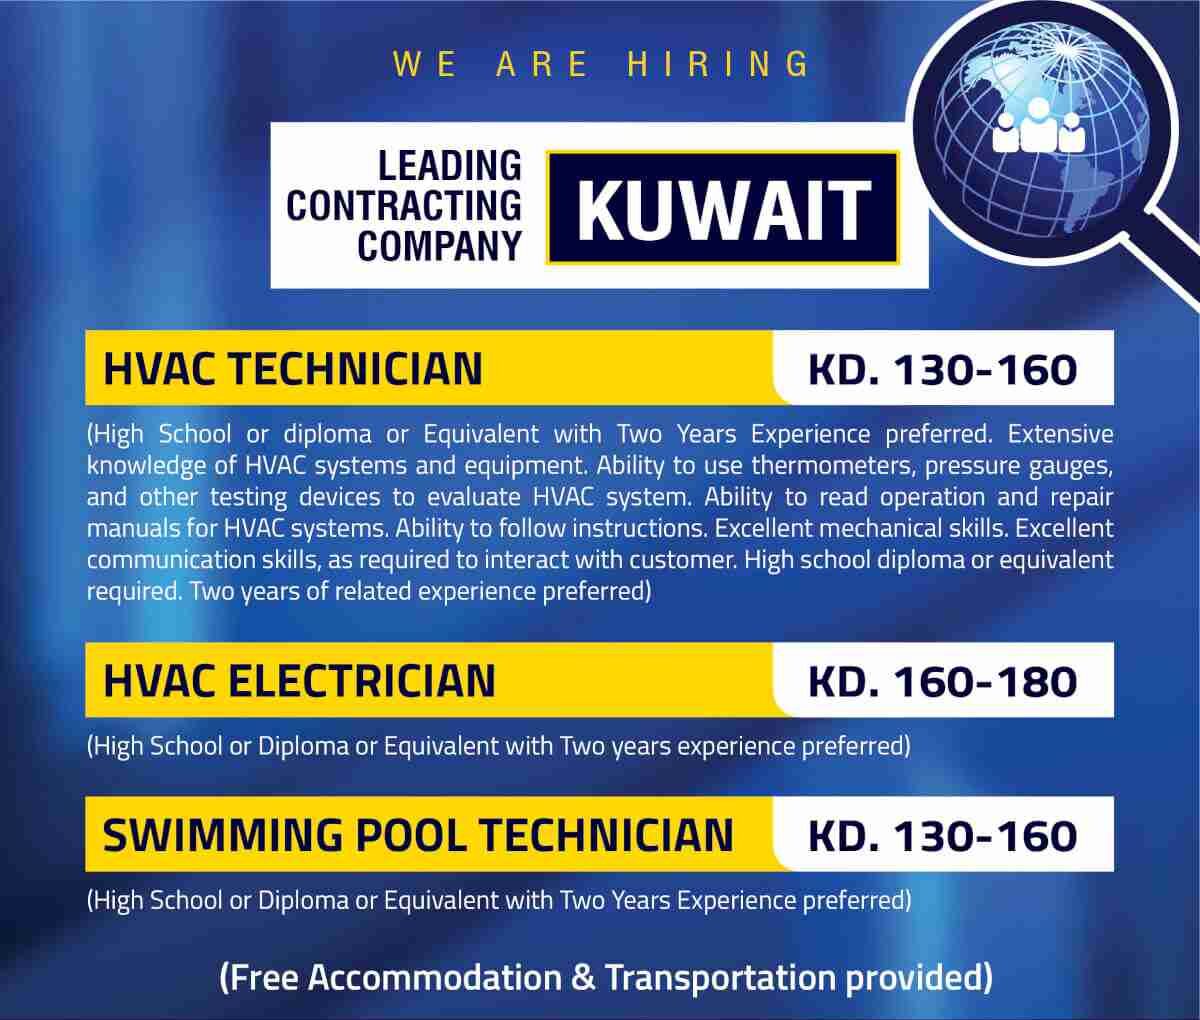 You are currently viewing Gulf Interview | Hiring for Hvac/Swiming pool technician – Kuwait